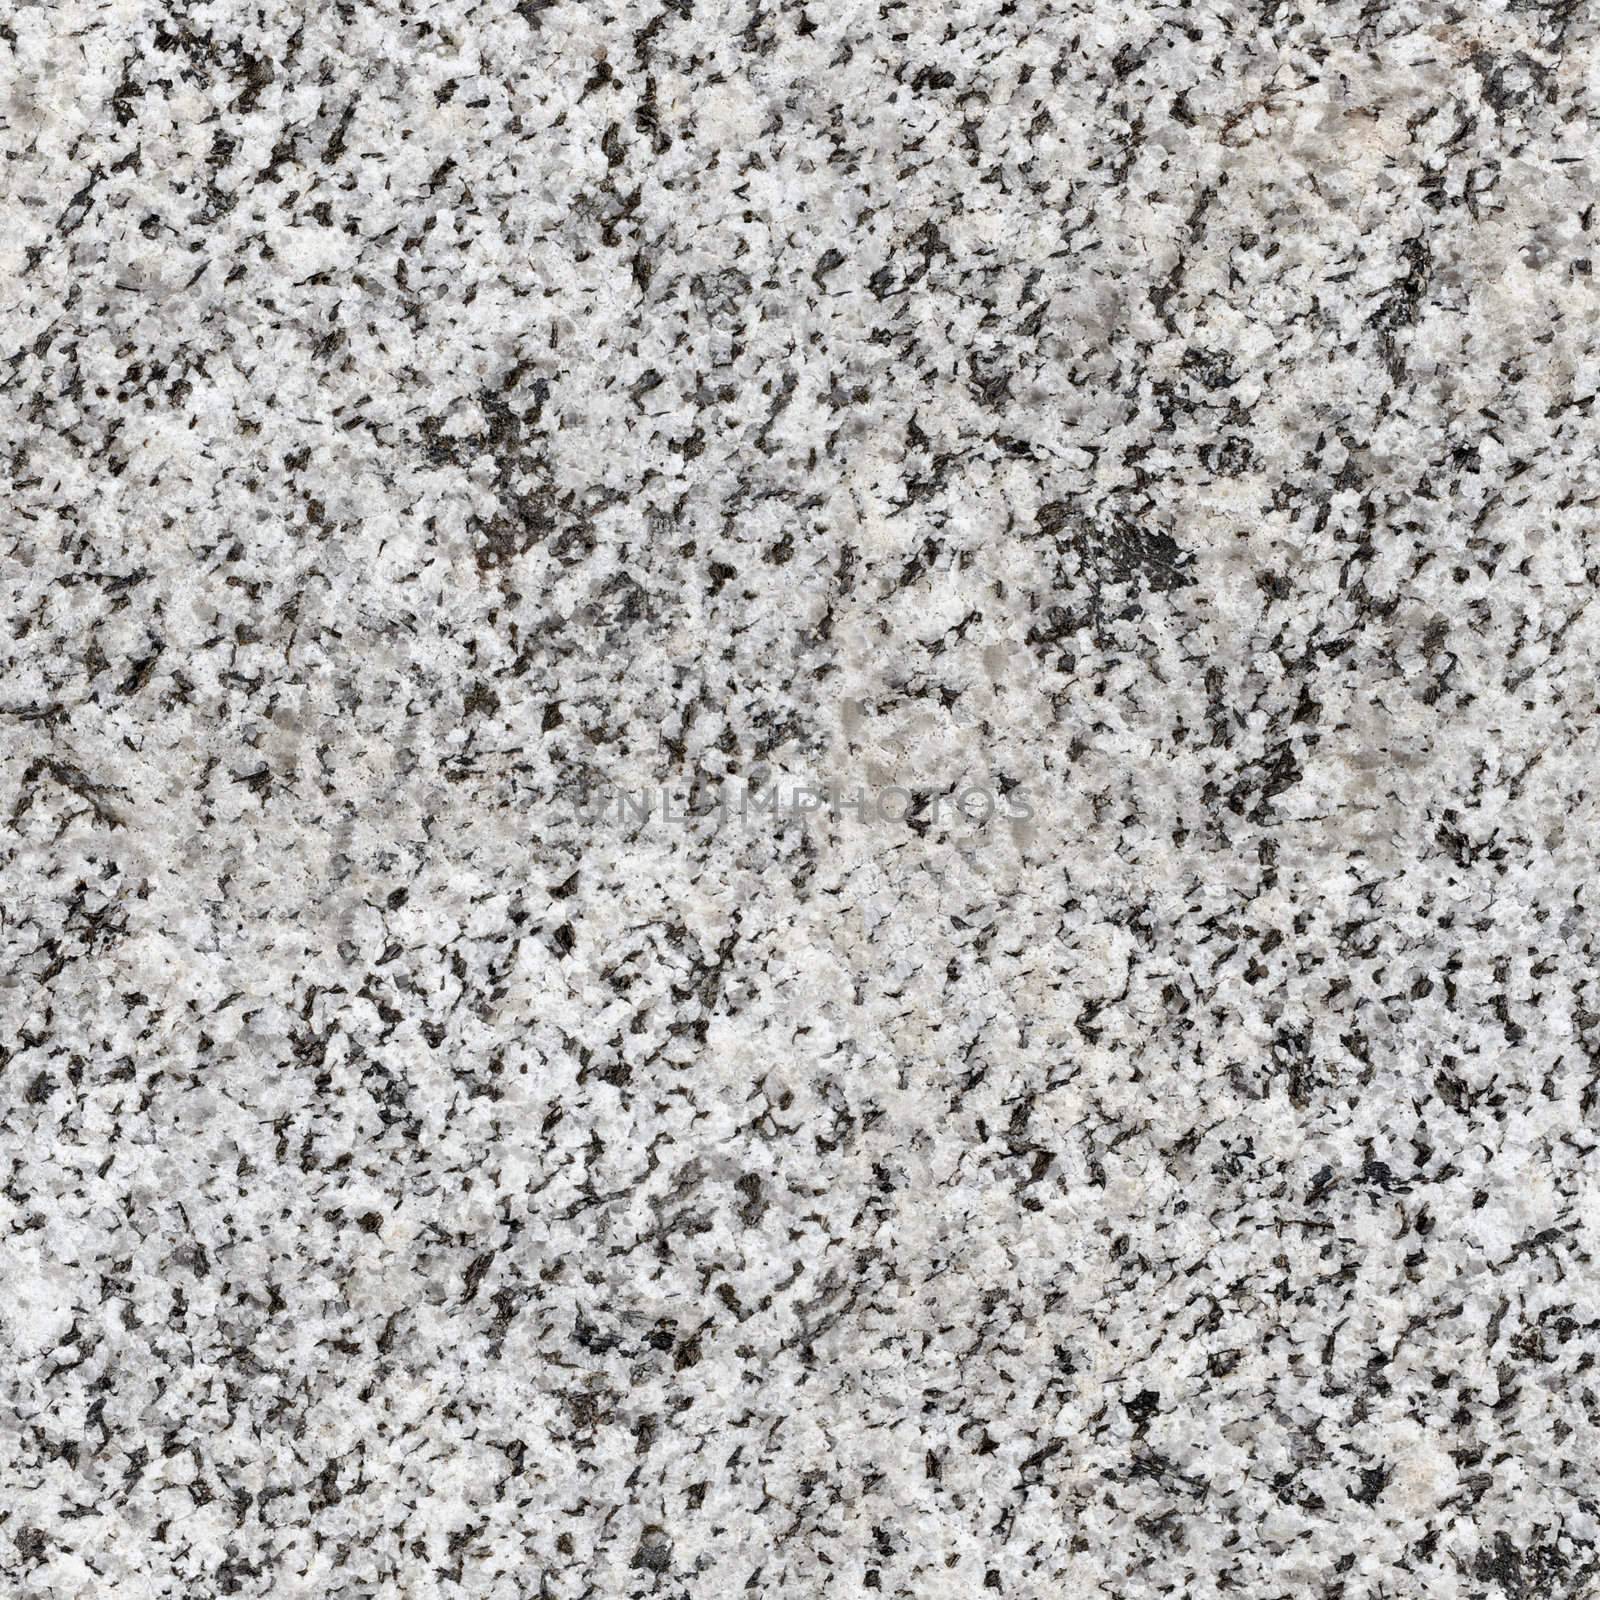 Seamless texture - The surface of the stone boulder